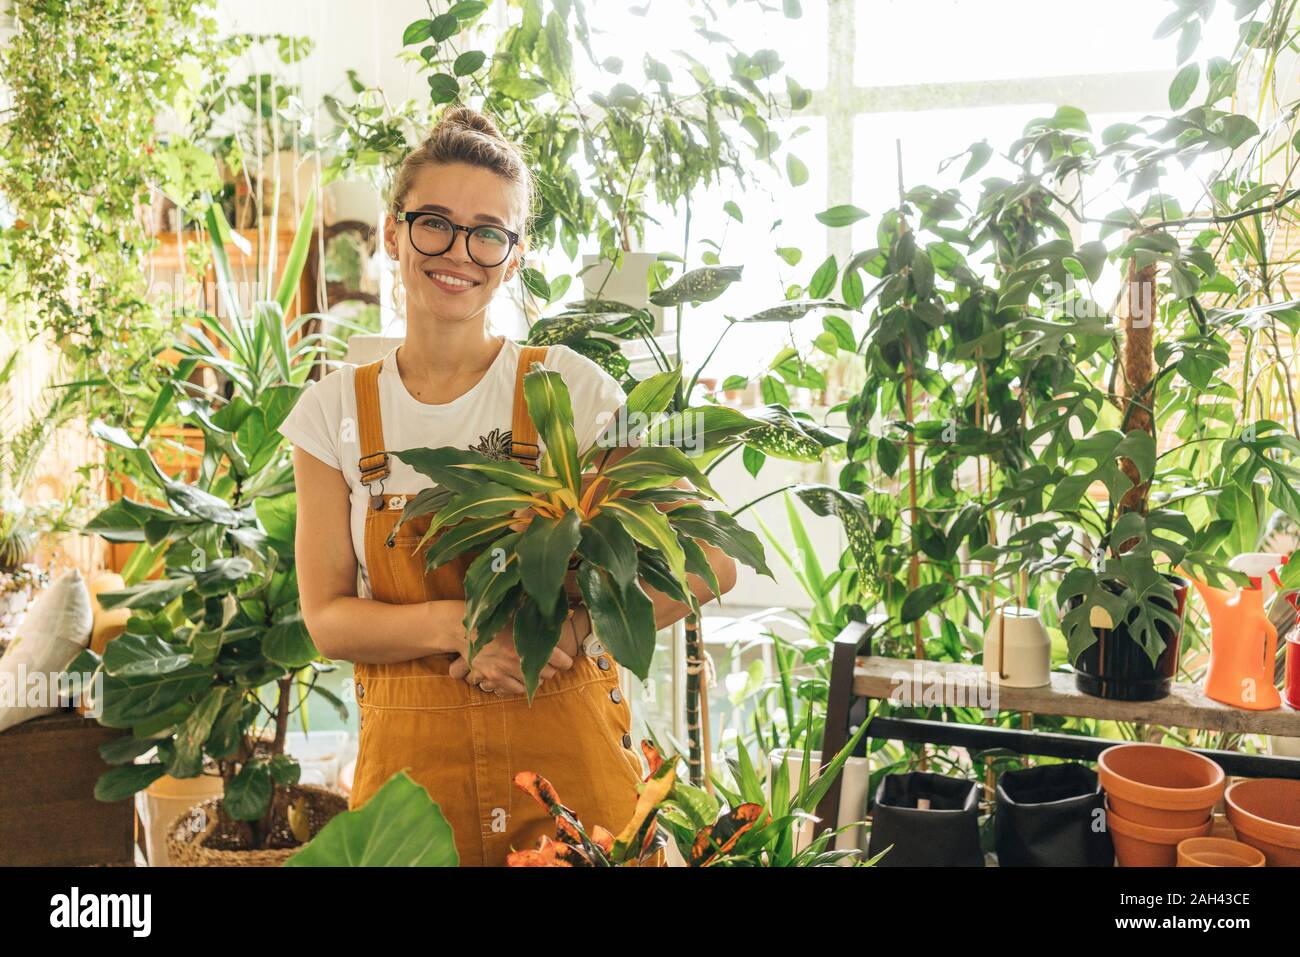 Portrait of a smiling young woman holding a plant in a small gardening shop Stock Photo